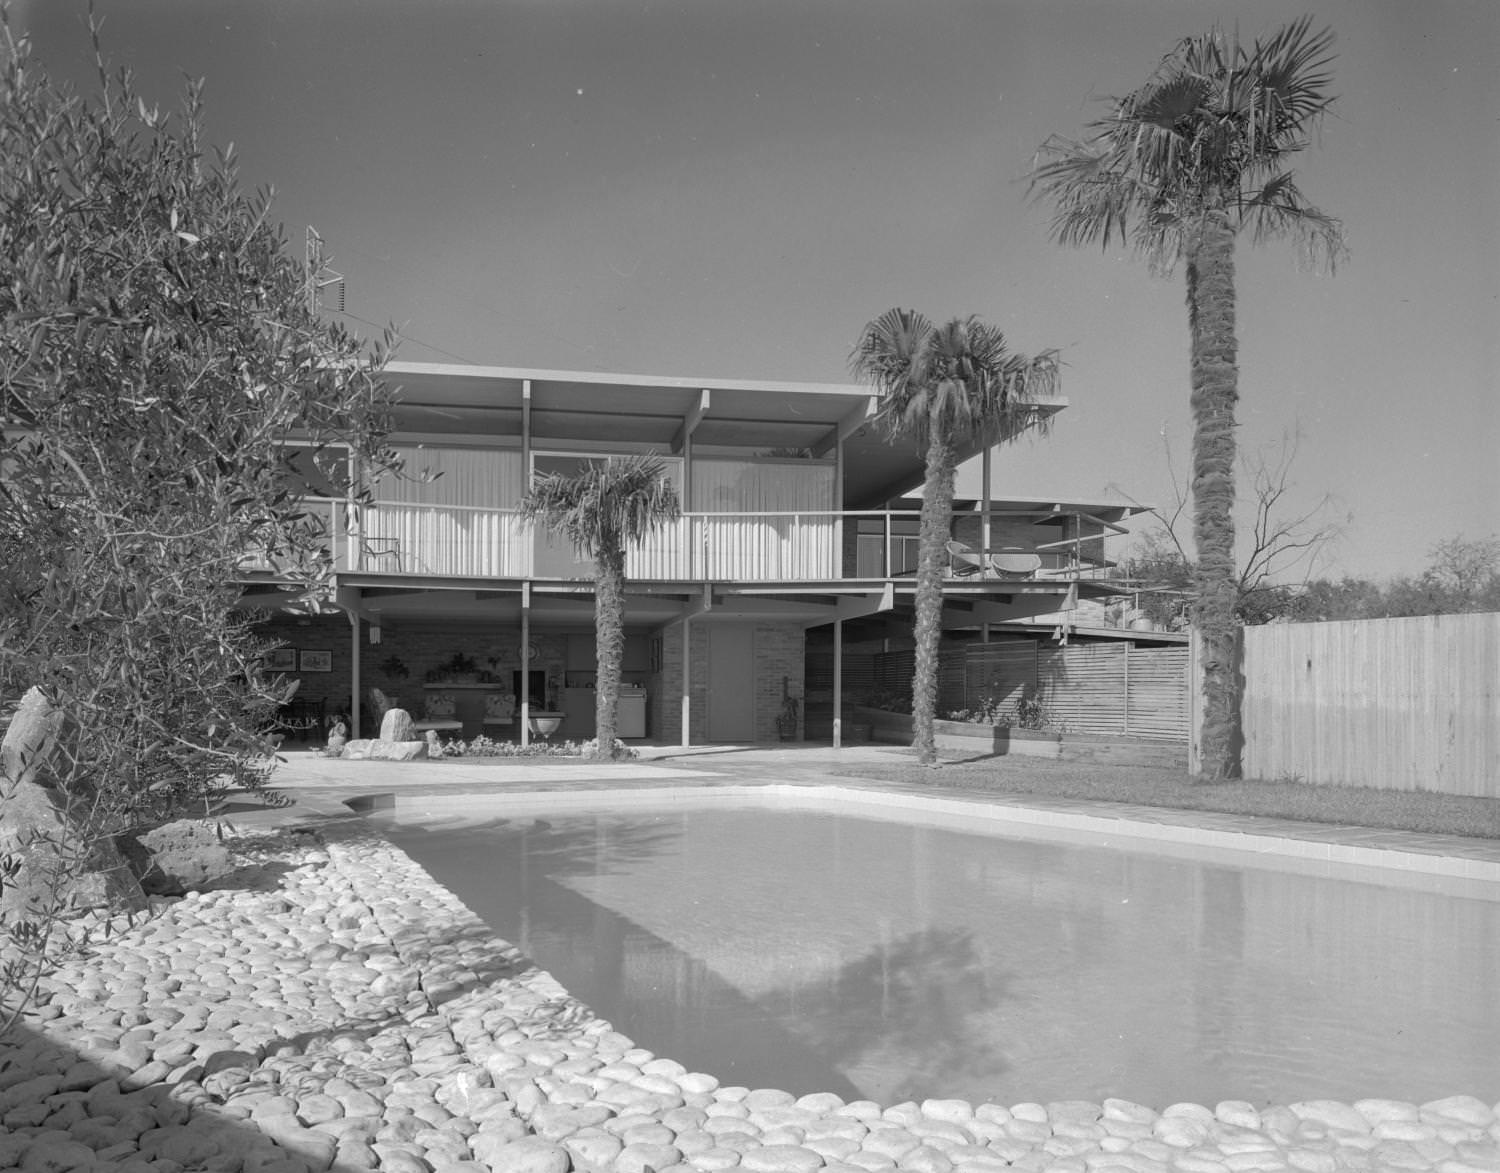 Home with Pool, Austin, 1960